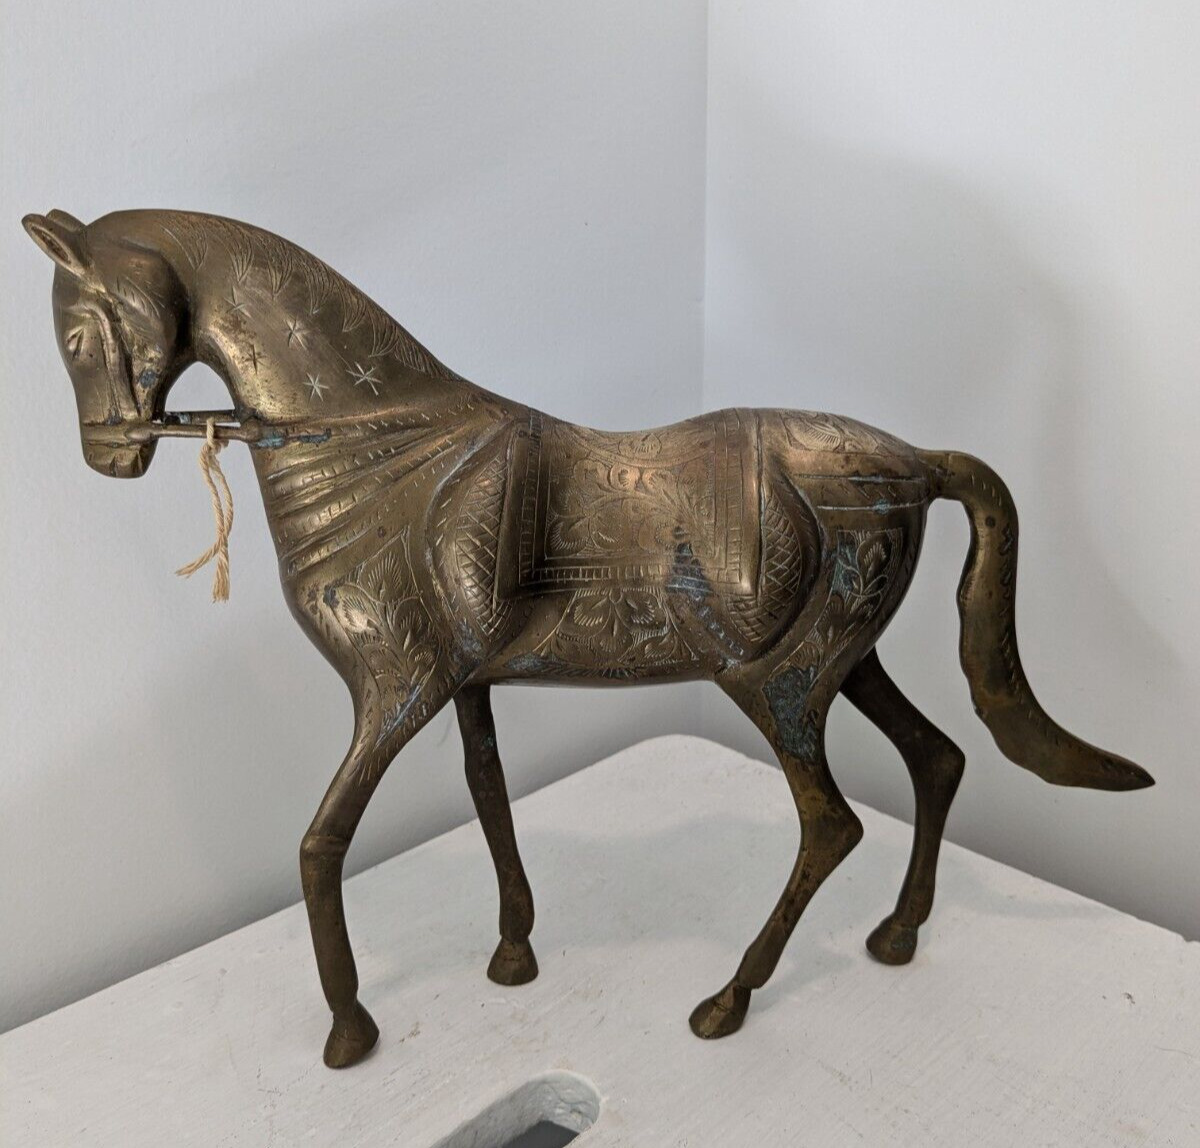 Stunning Brass Horse Etched with Details Vintage Pakistan Shalimar Collection